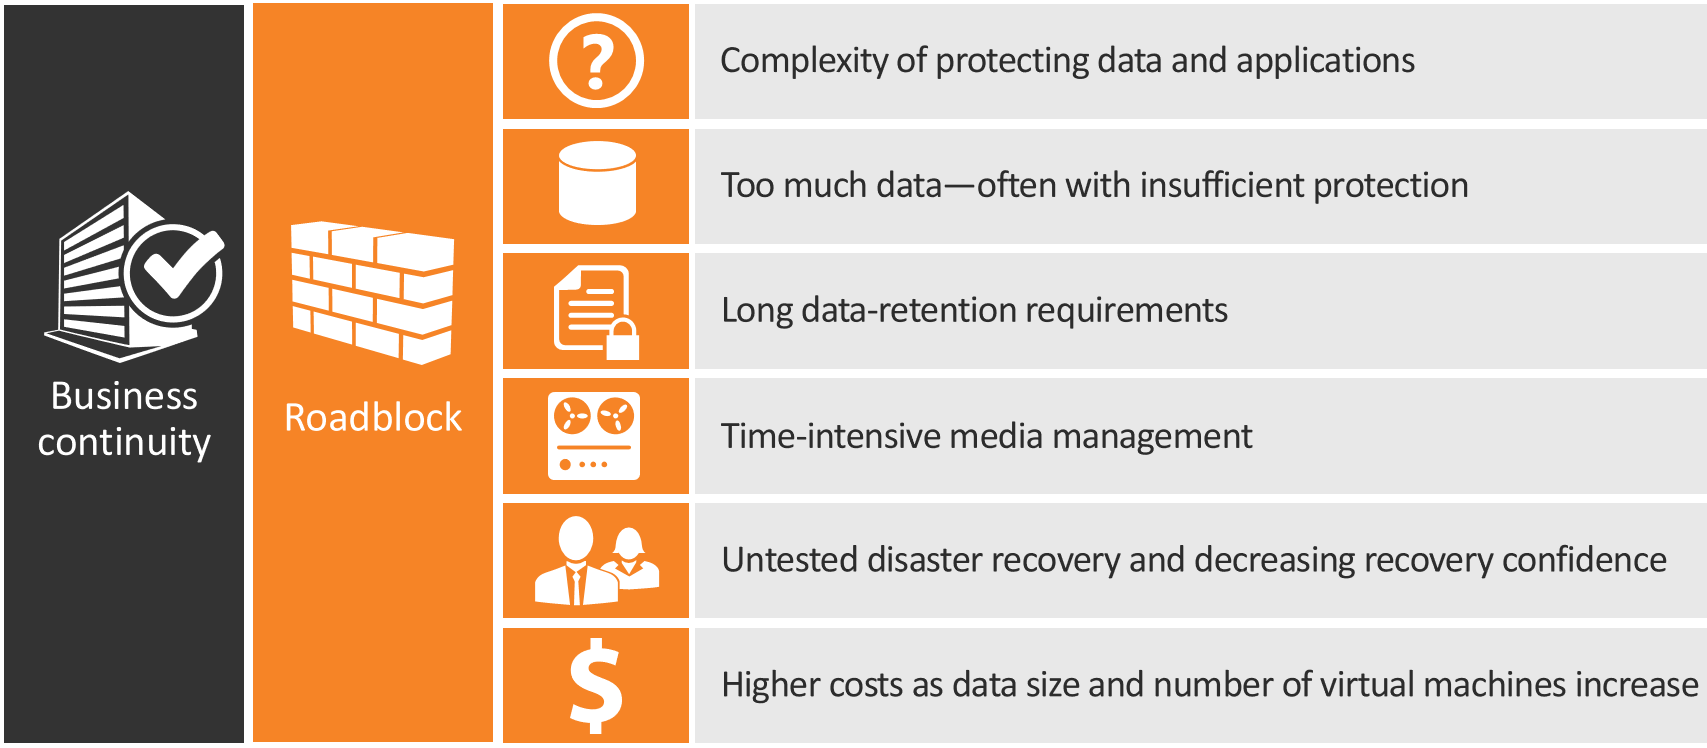 Image of business continuity roadblocks, highlighting: Complexity of protecting data and applications, Too much data - often with insufficient protection - long data-retention requirements, time-intensive media management, untested disaster recovery and decreasing recovery confidence, higher costs as data size and number of virtual machines increase